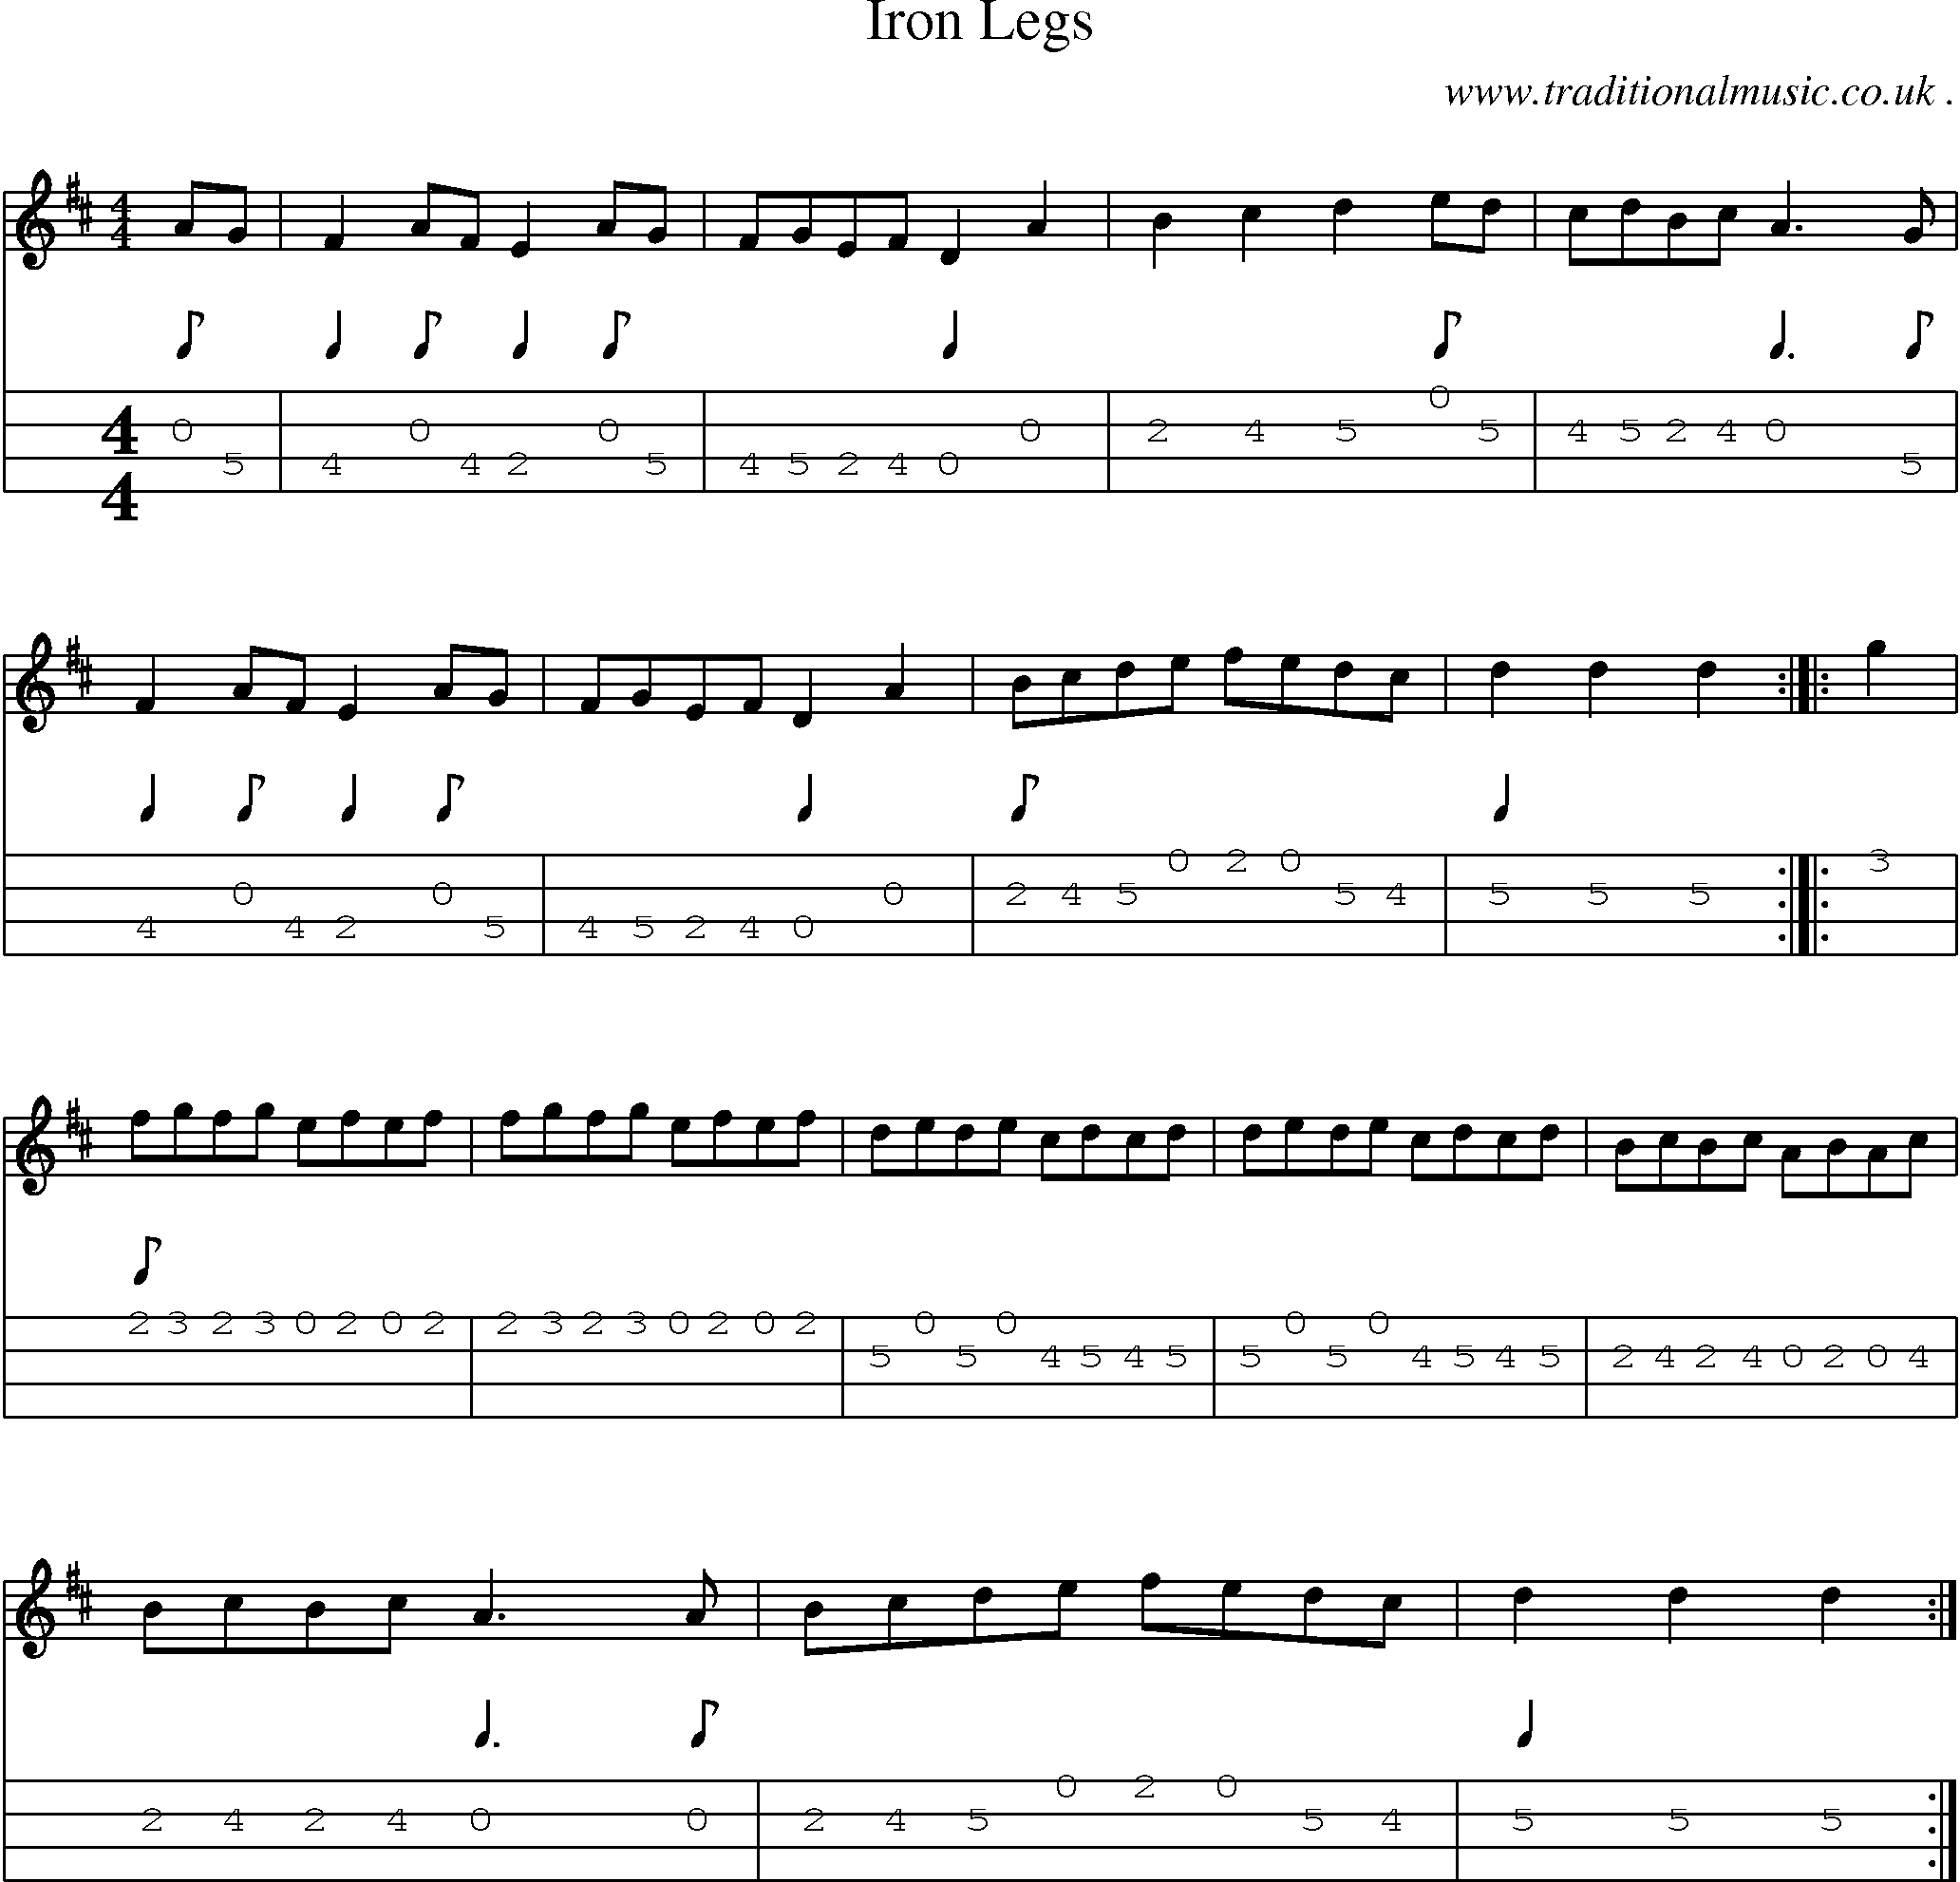 Sheet-music  score, Chords and Mandolin Tabs for Iron Legs